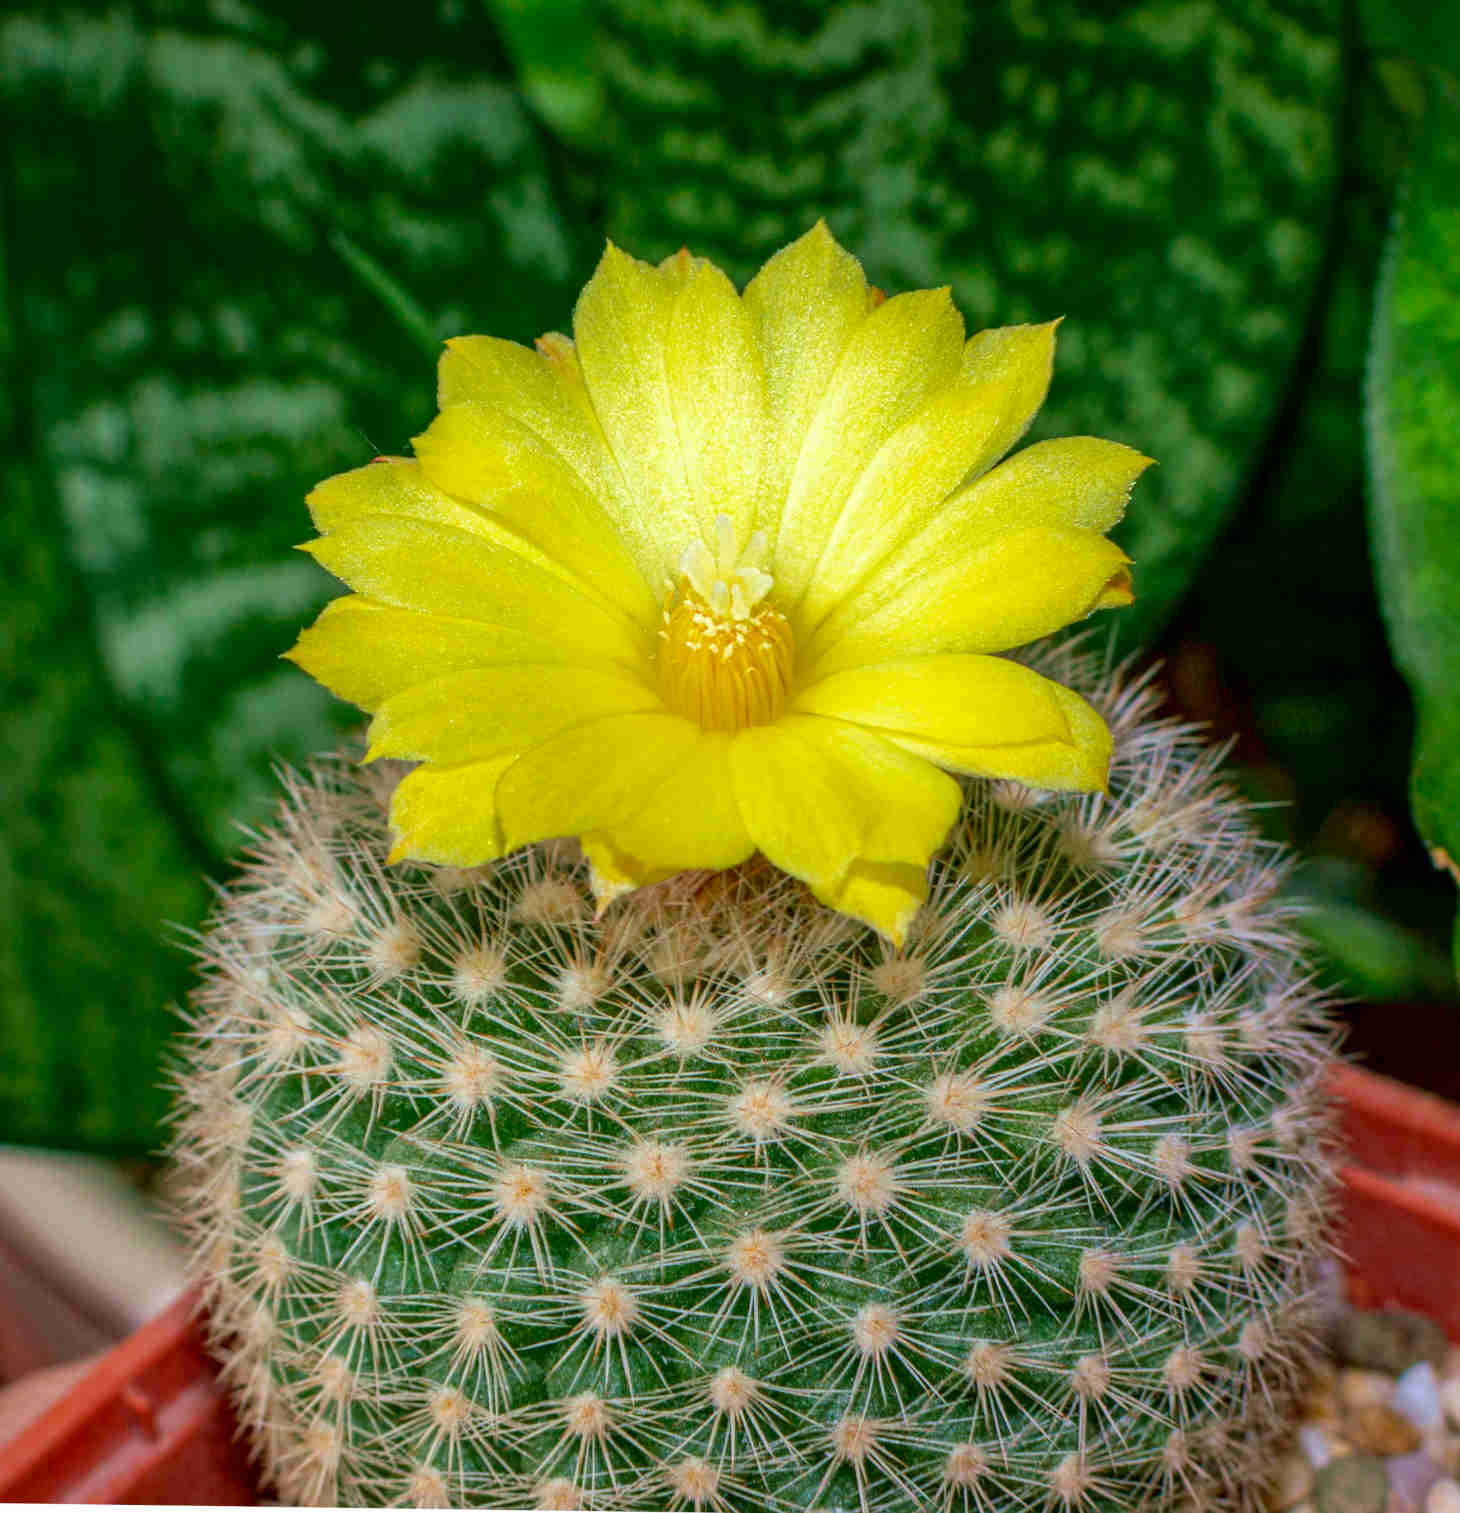 cactus with a vibrant yellow flower